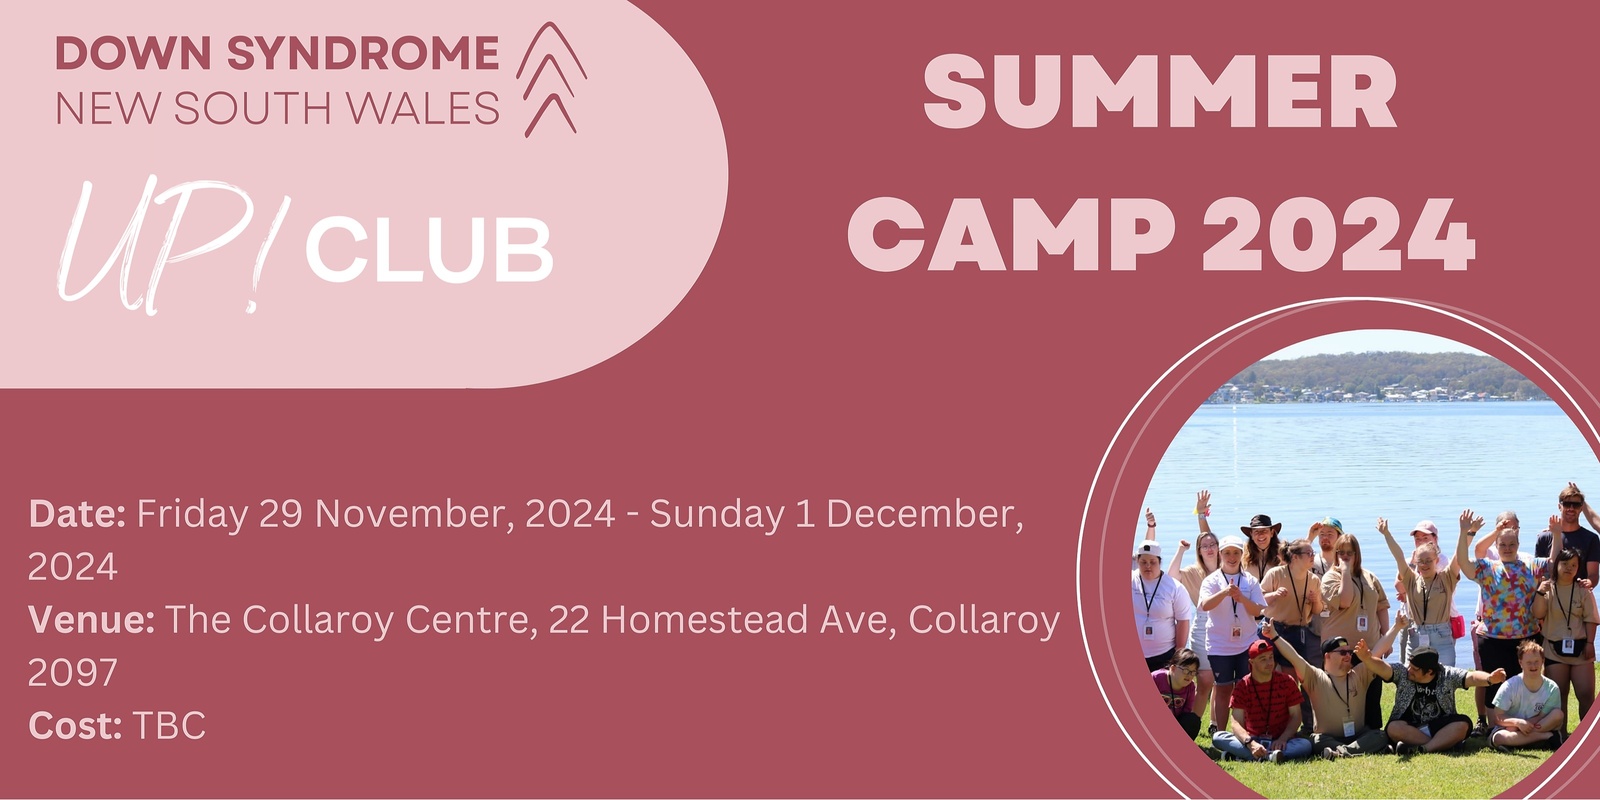 Banner image for UP! Club Summer Camp 2024: The Collaroy Centre